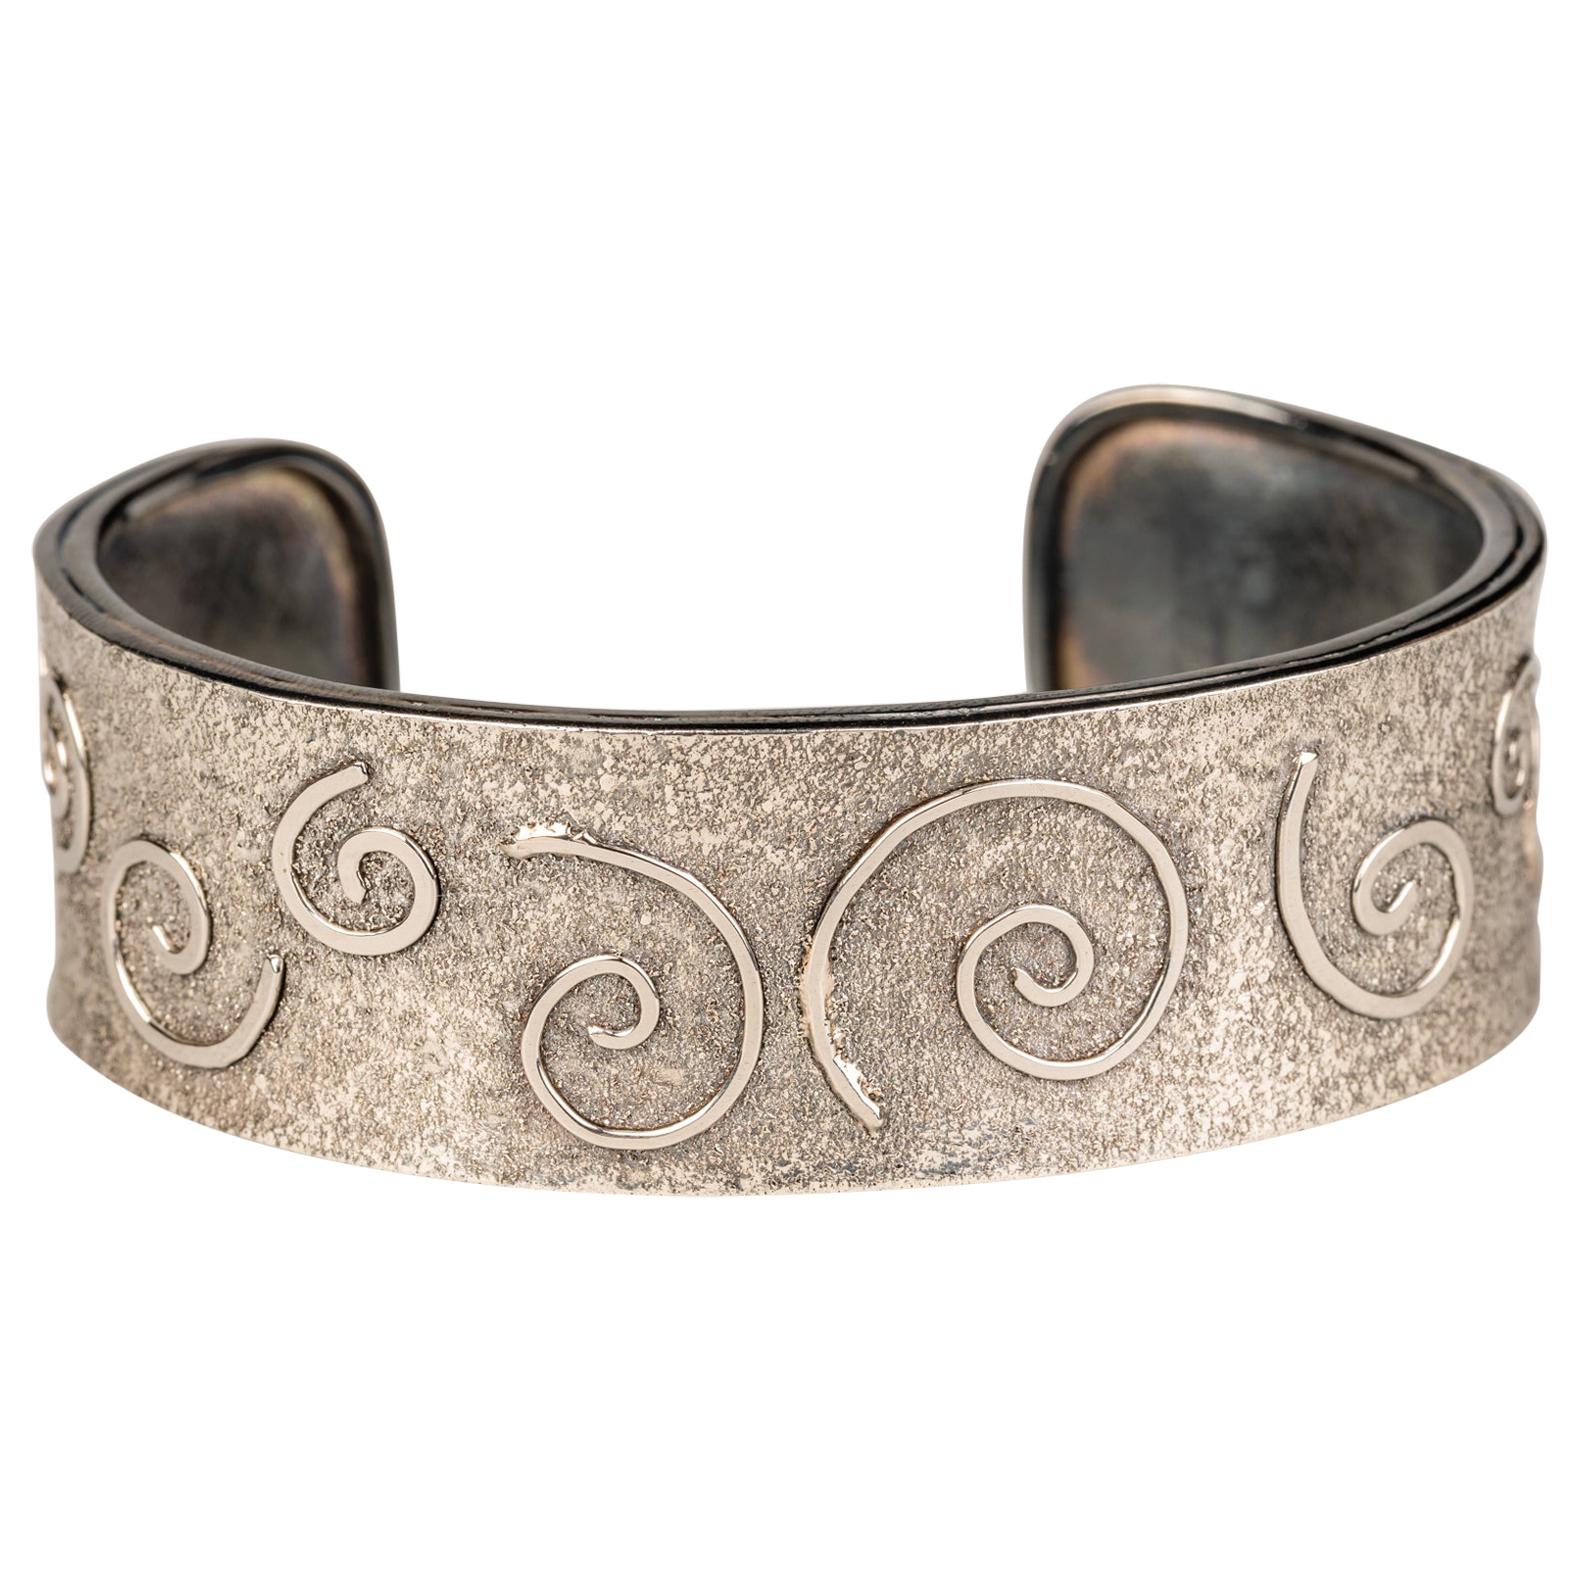 Oxidized Sterling Silver and Platinum Swirl Cuff For Sale